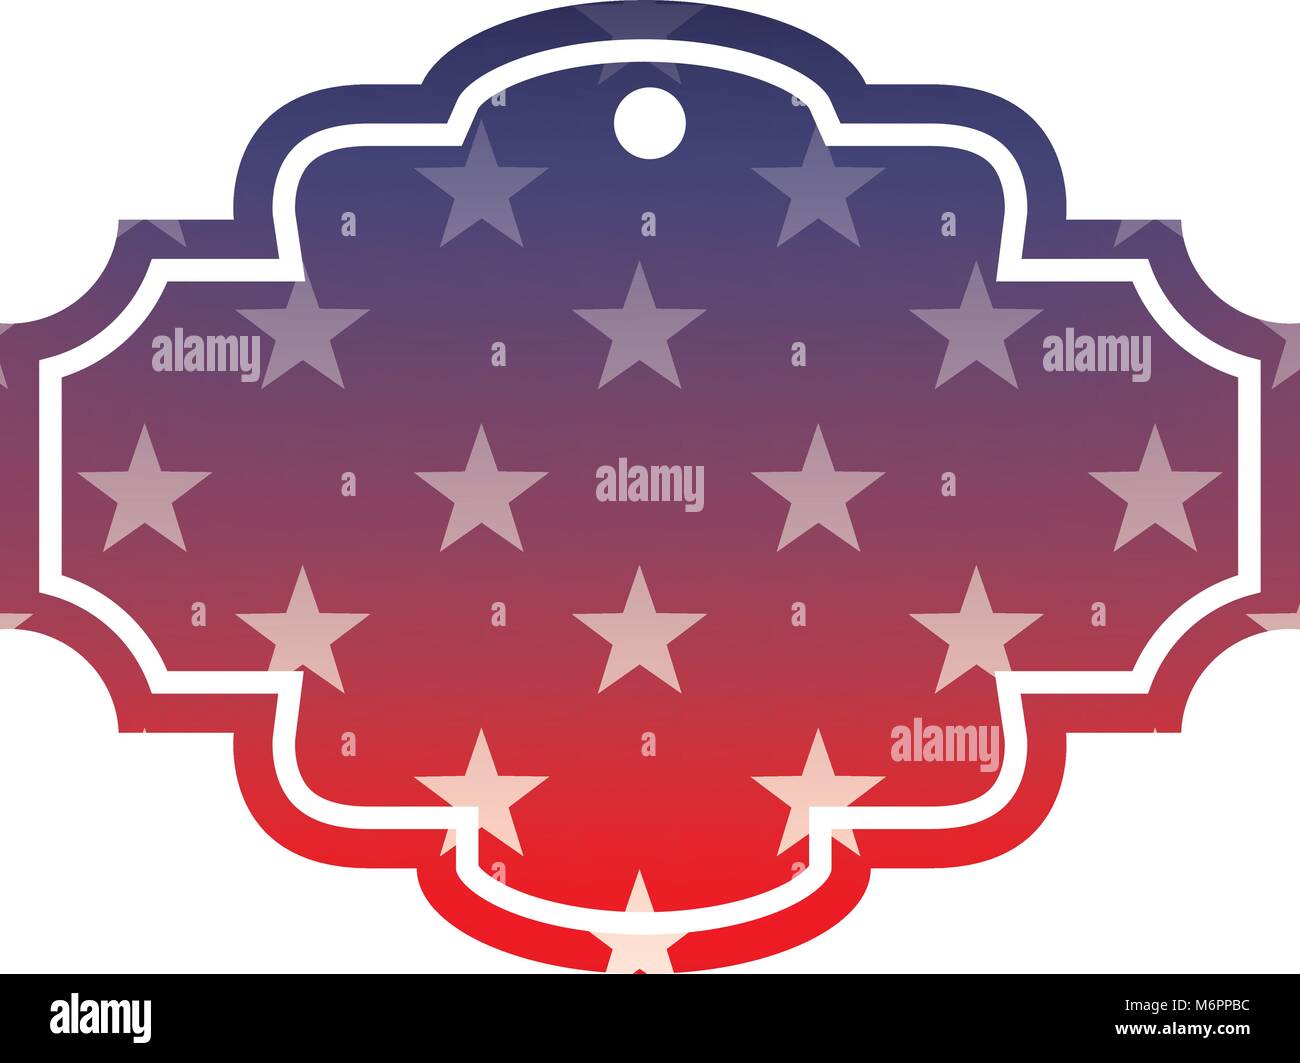 label with united states of america flag degraded blur vector illustration Stock Vector